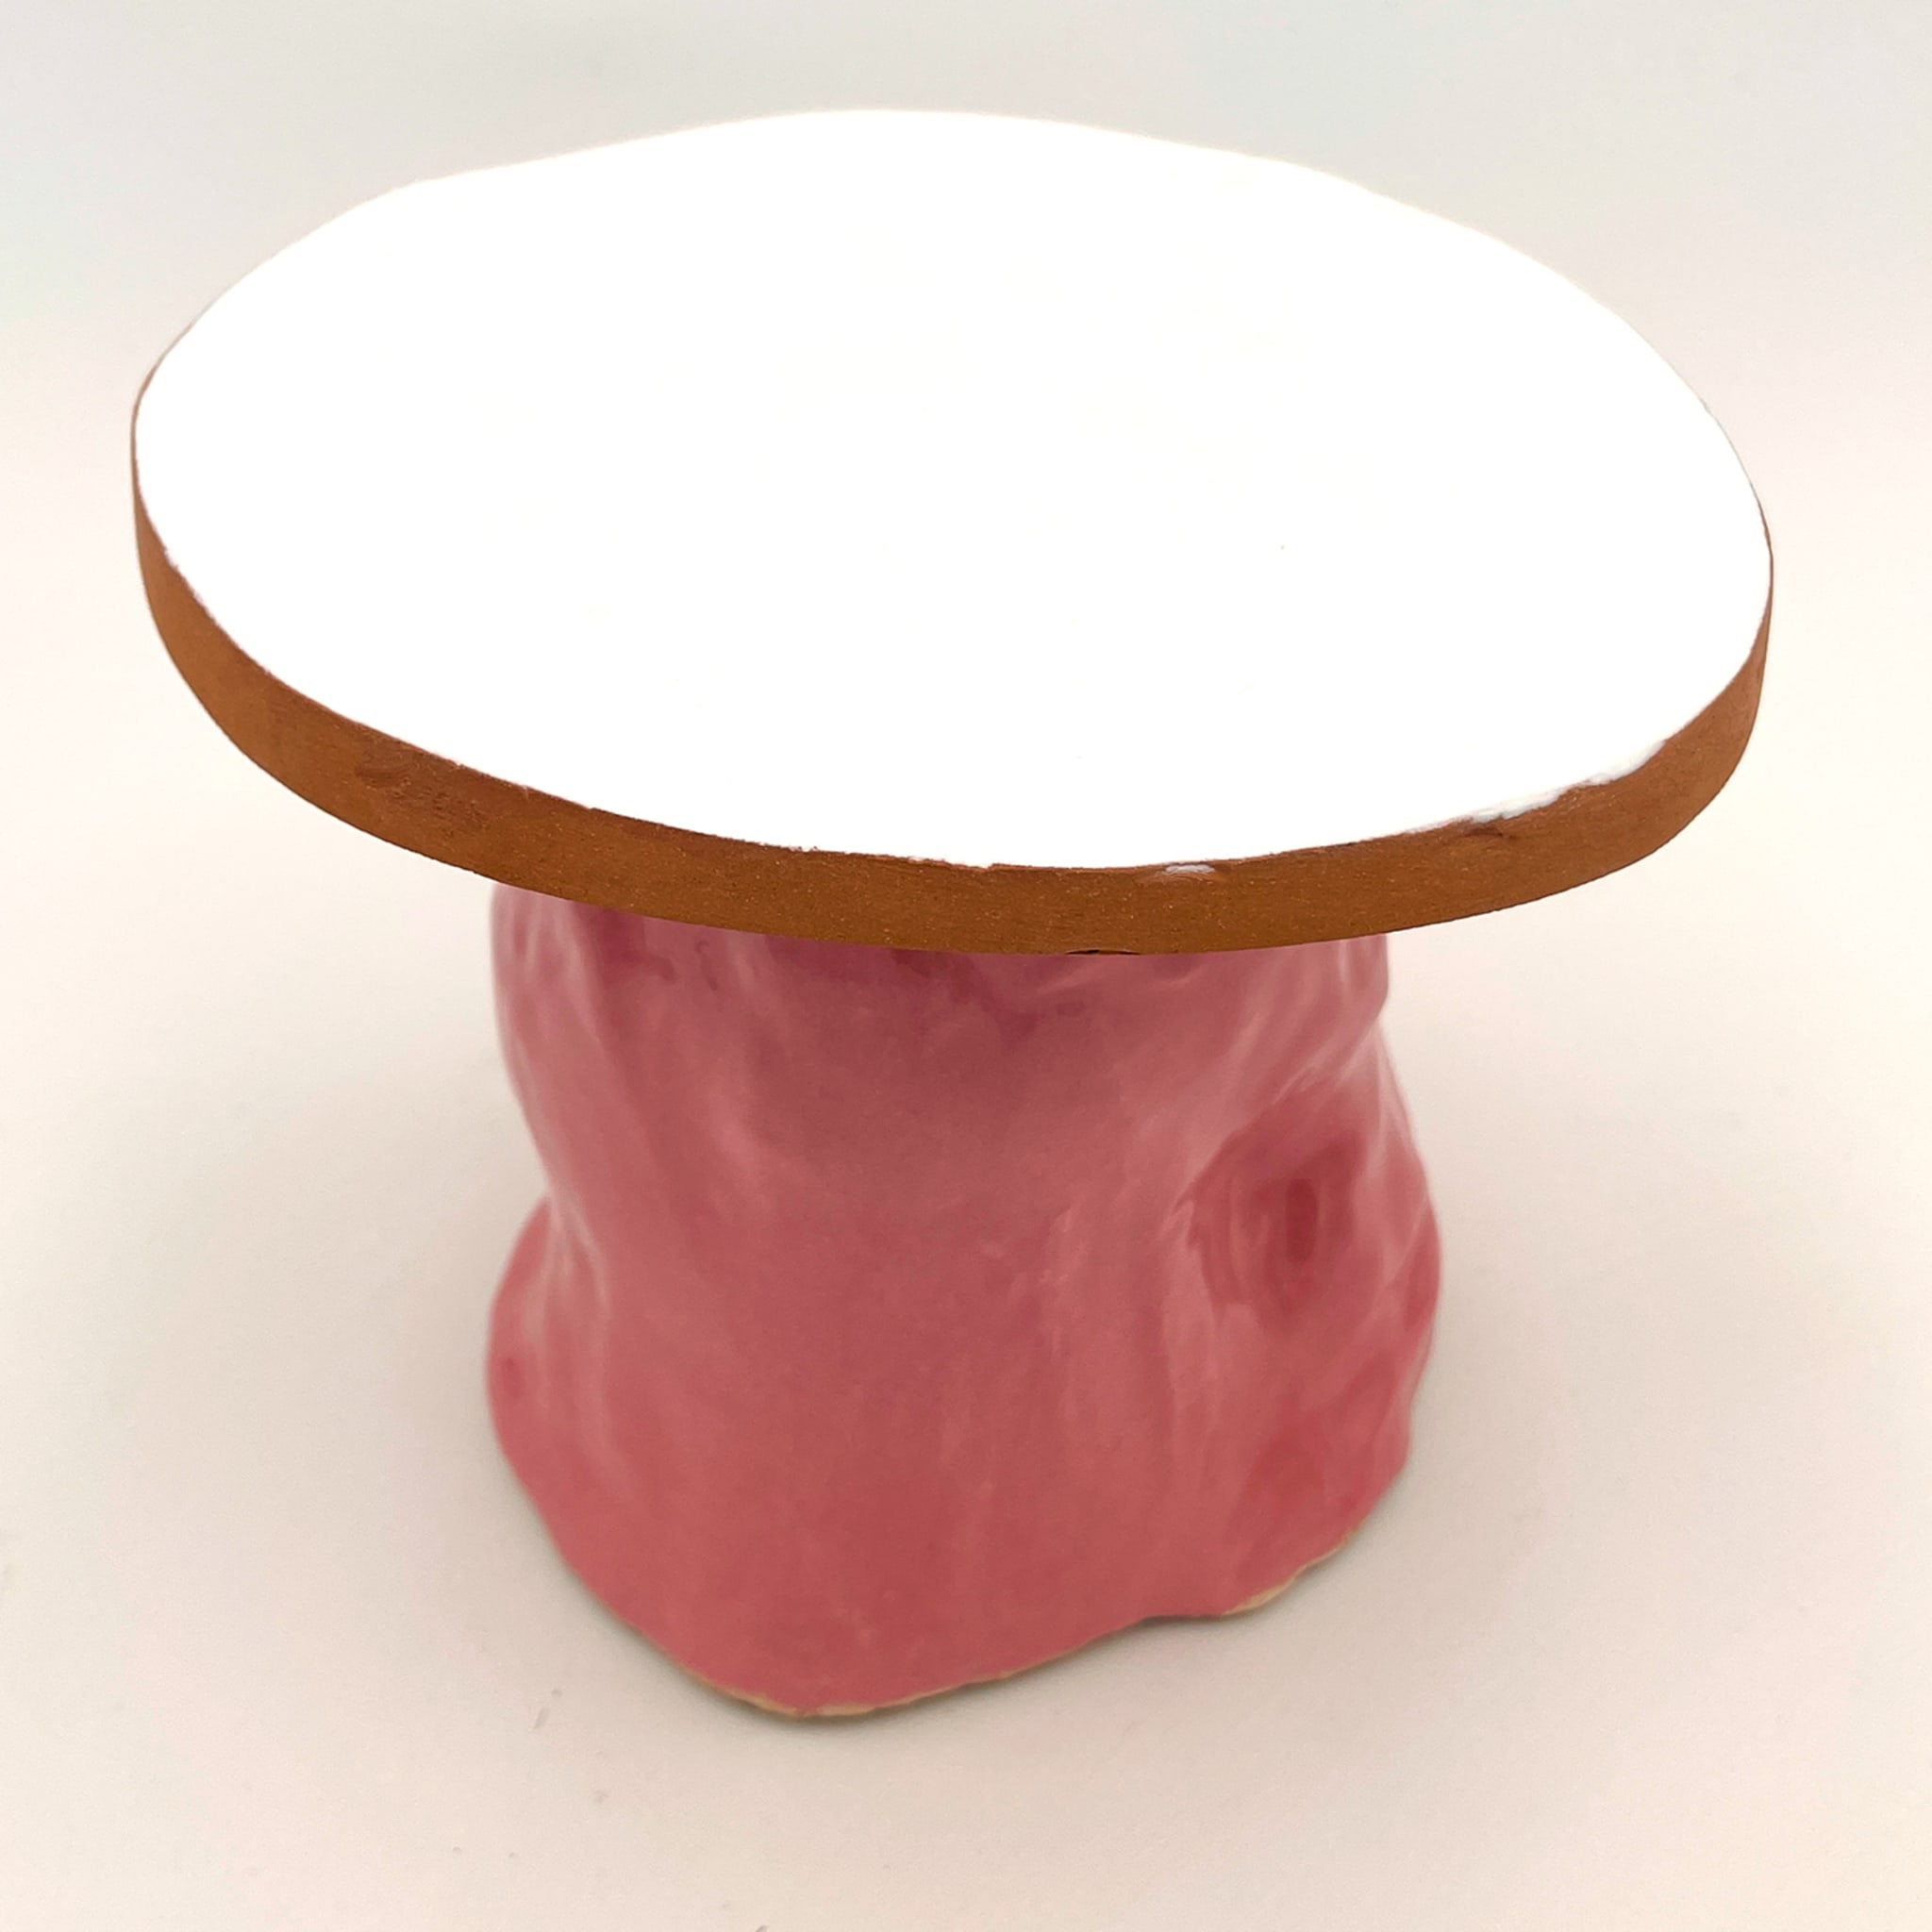 Fungo Rock Pink and Shiny White Cake Stand - Alternative view 2